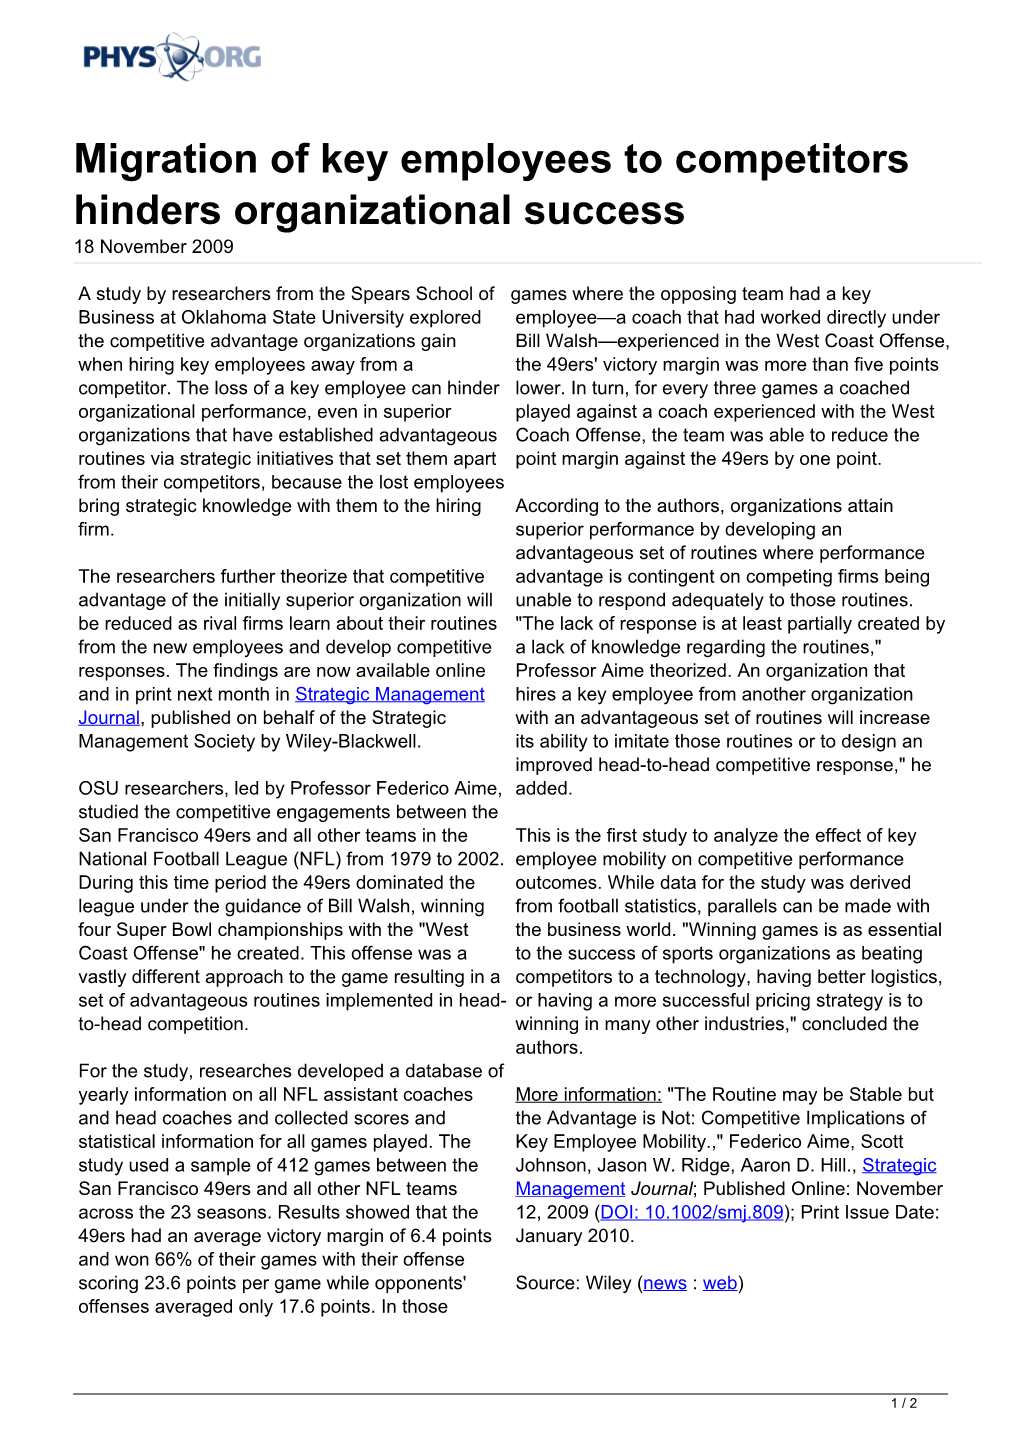 Migration of Key Employees to Competitors Hinders Organizational Success 18 November 2009